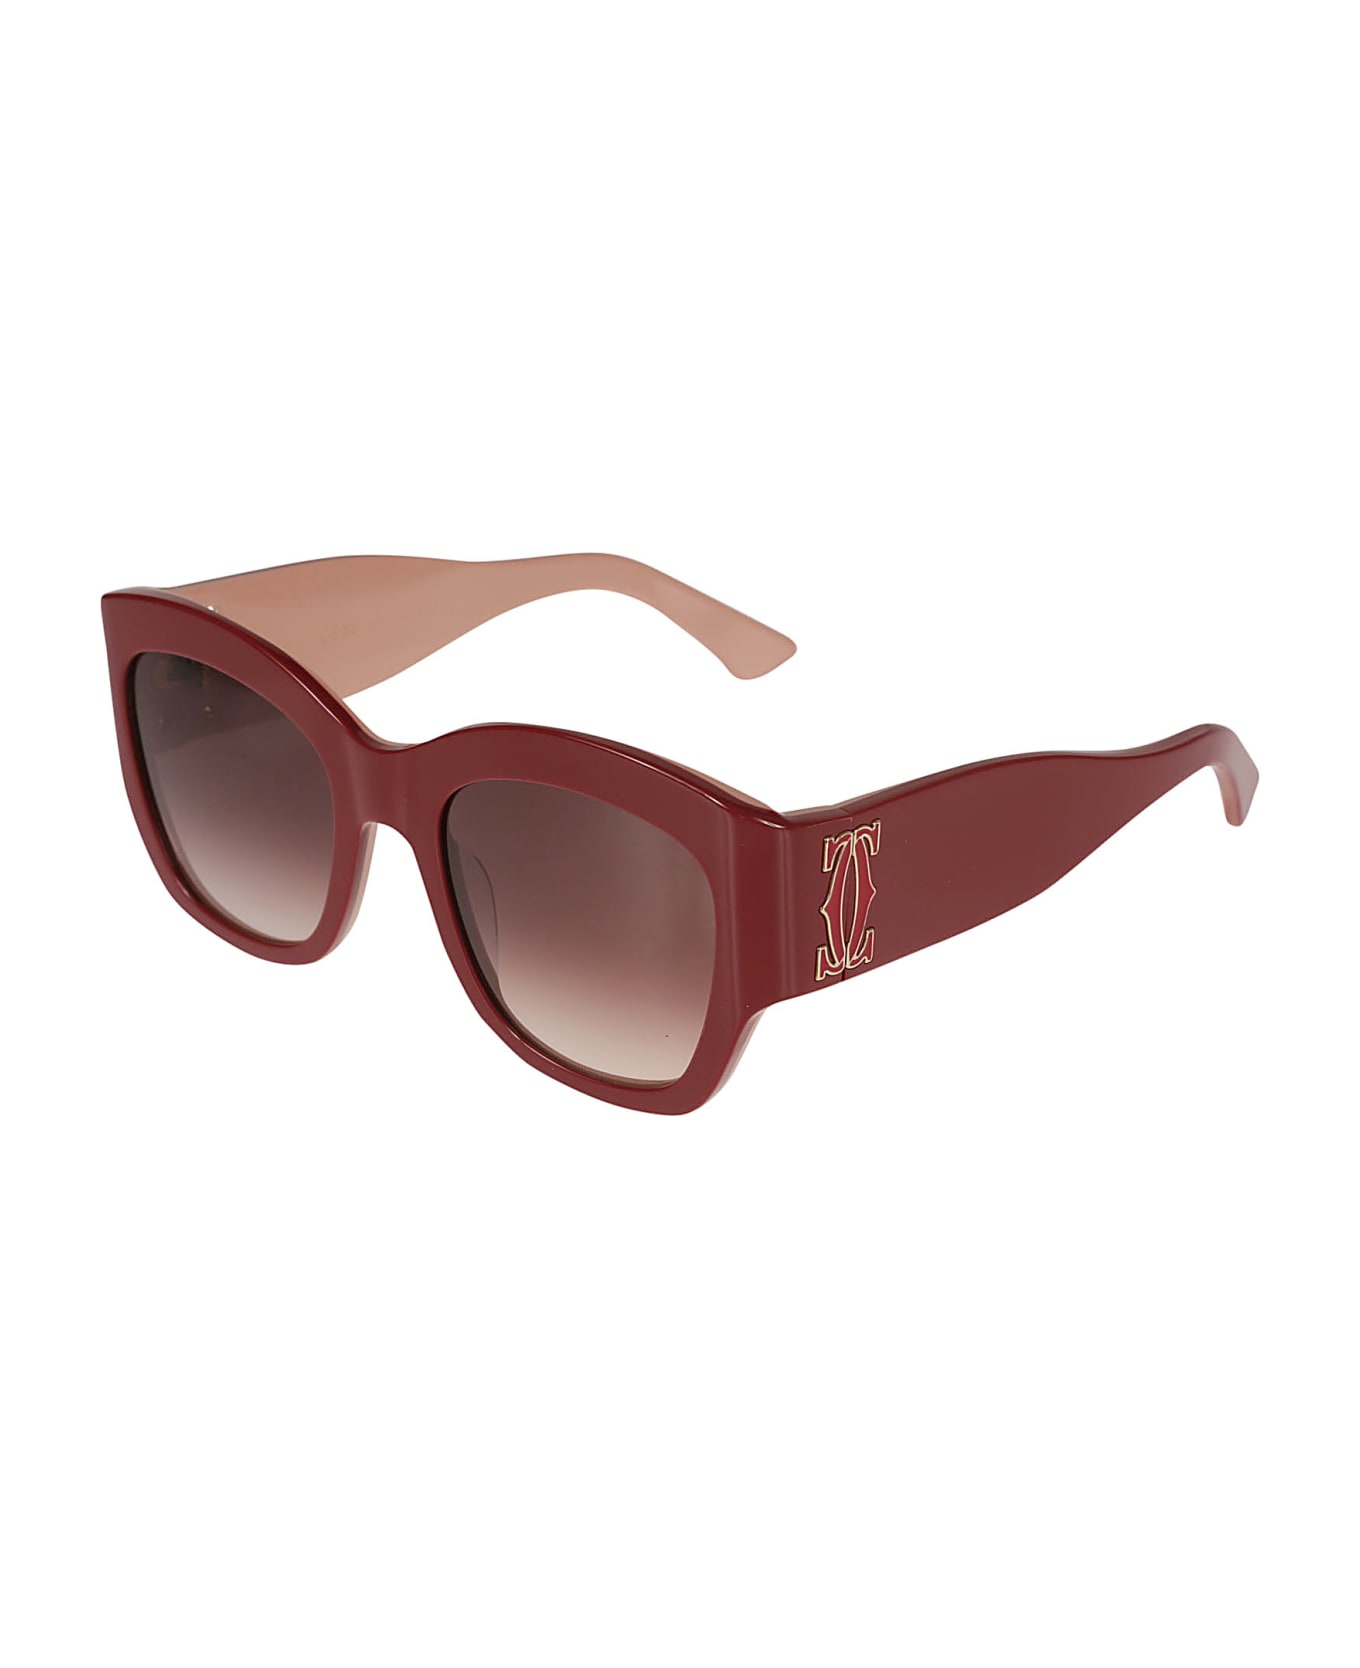 Cartier Eyewear Curved Square Sunglasses - Burgundy Red サングラス